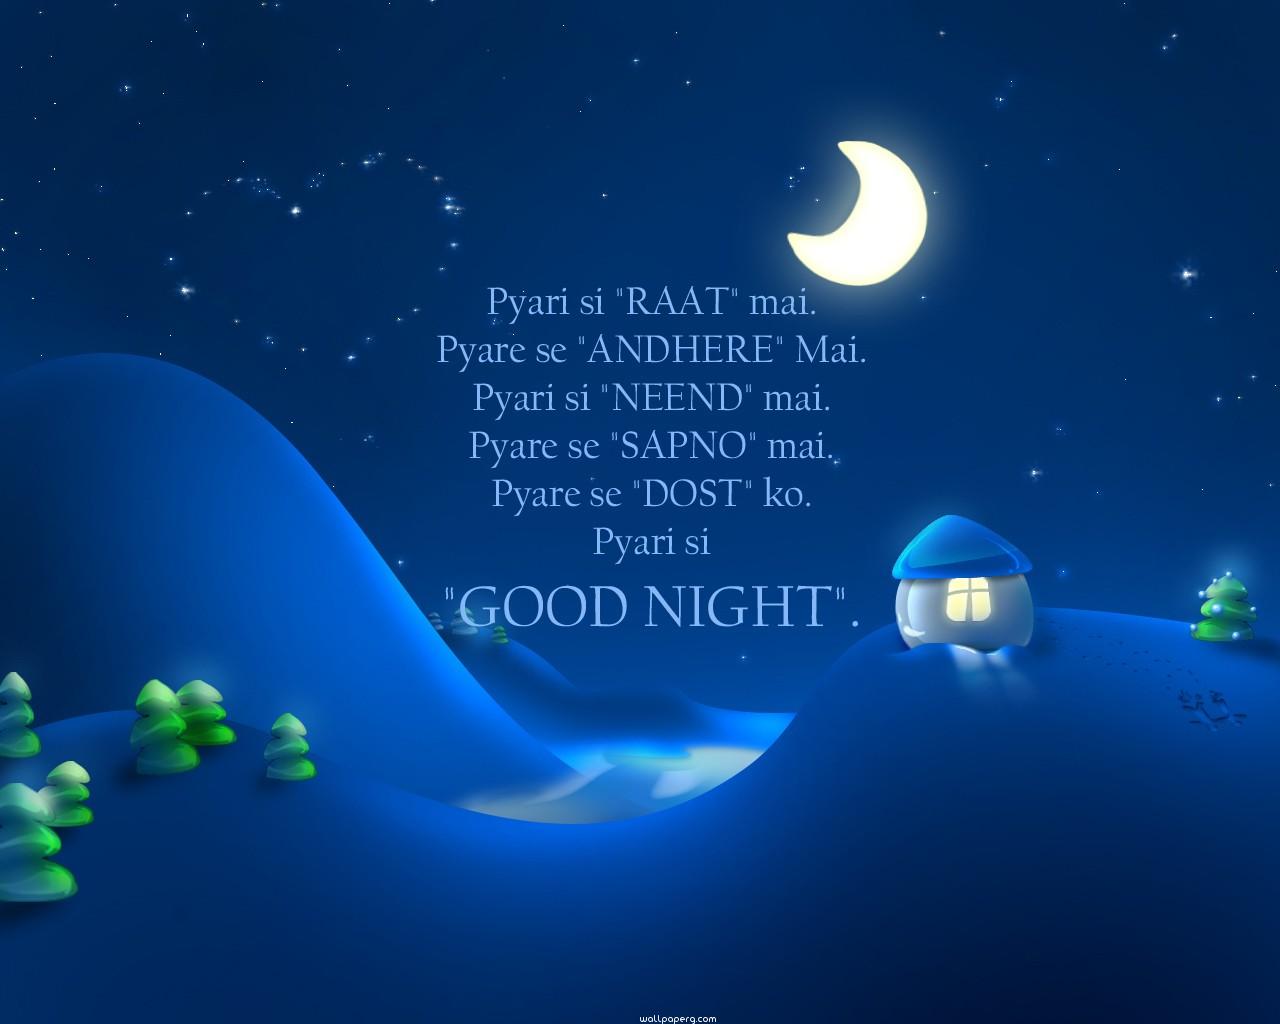 Download Good night hindi quote hd wallpaper - Good night wallpaper- For  Mobile Phone